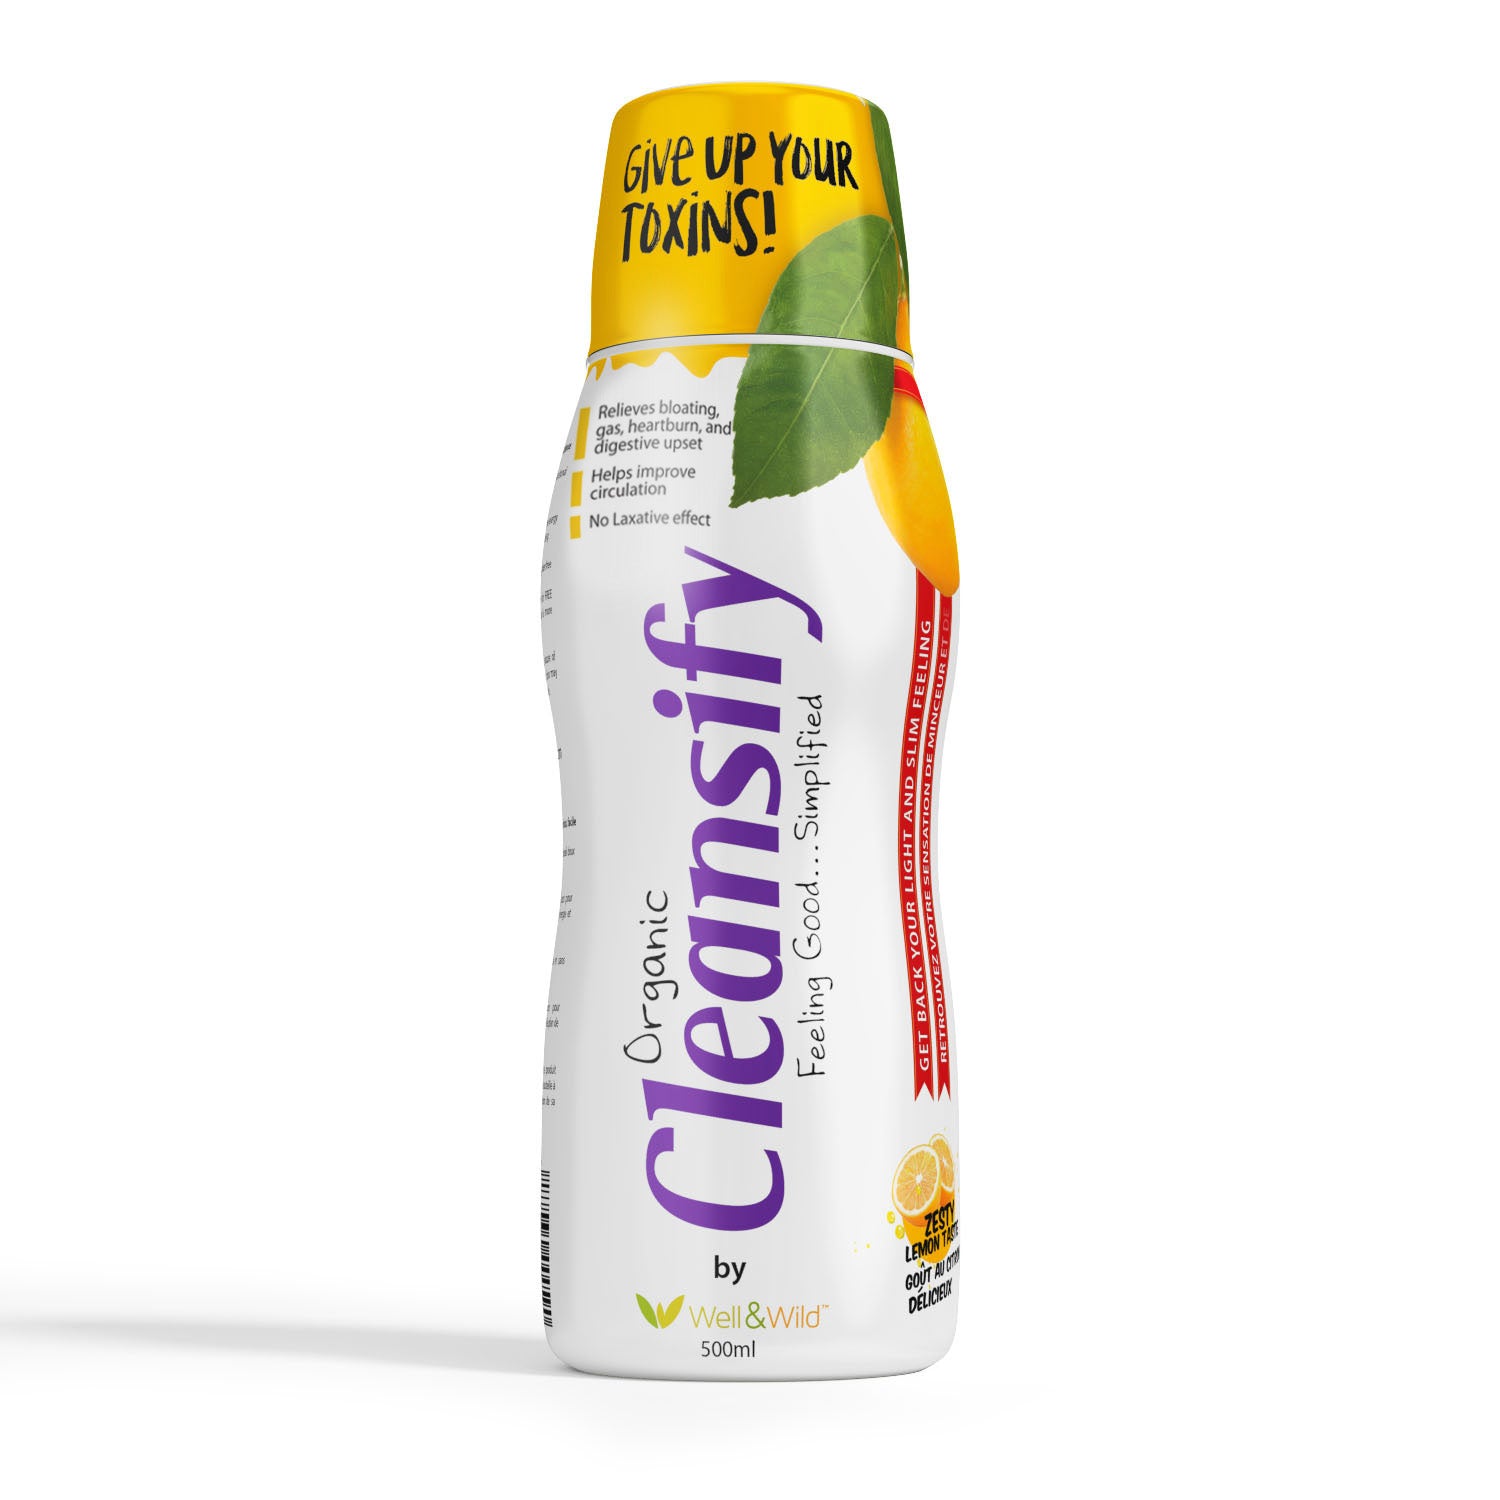 Organic Cleansify - Alkaline Cleans